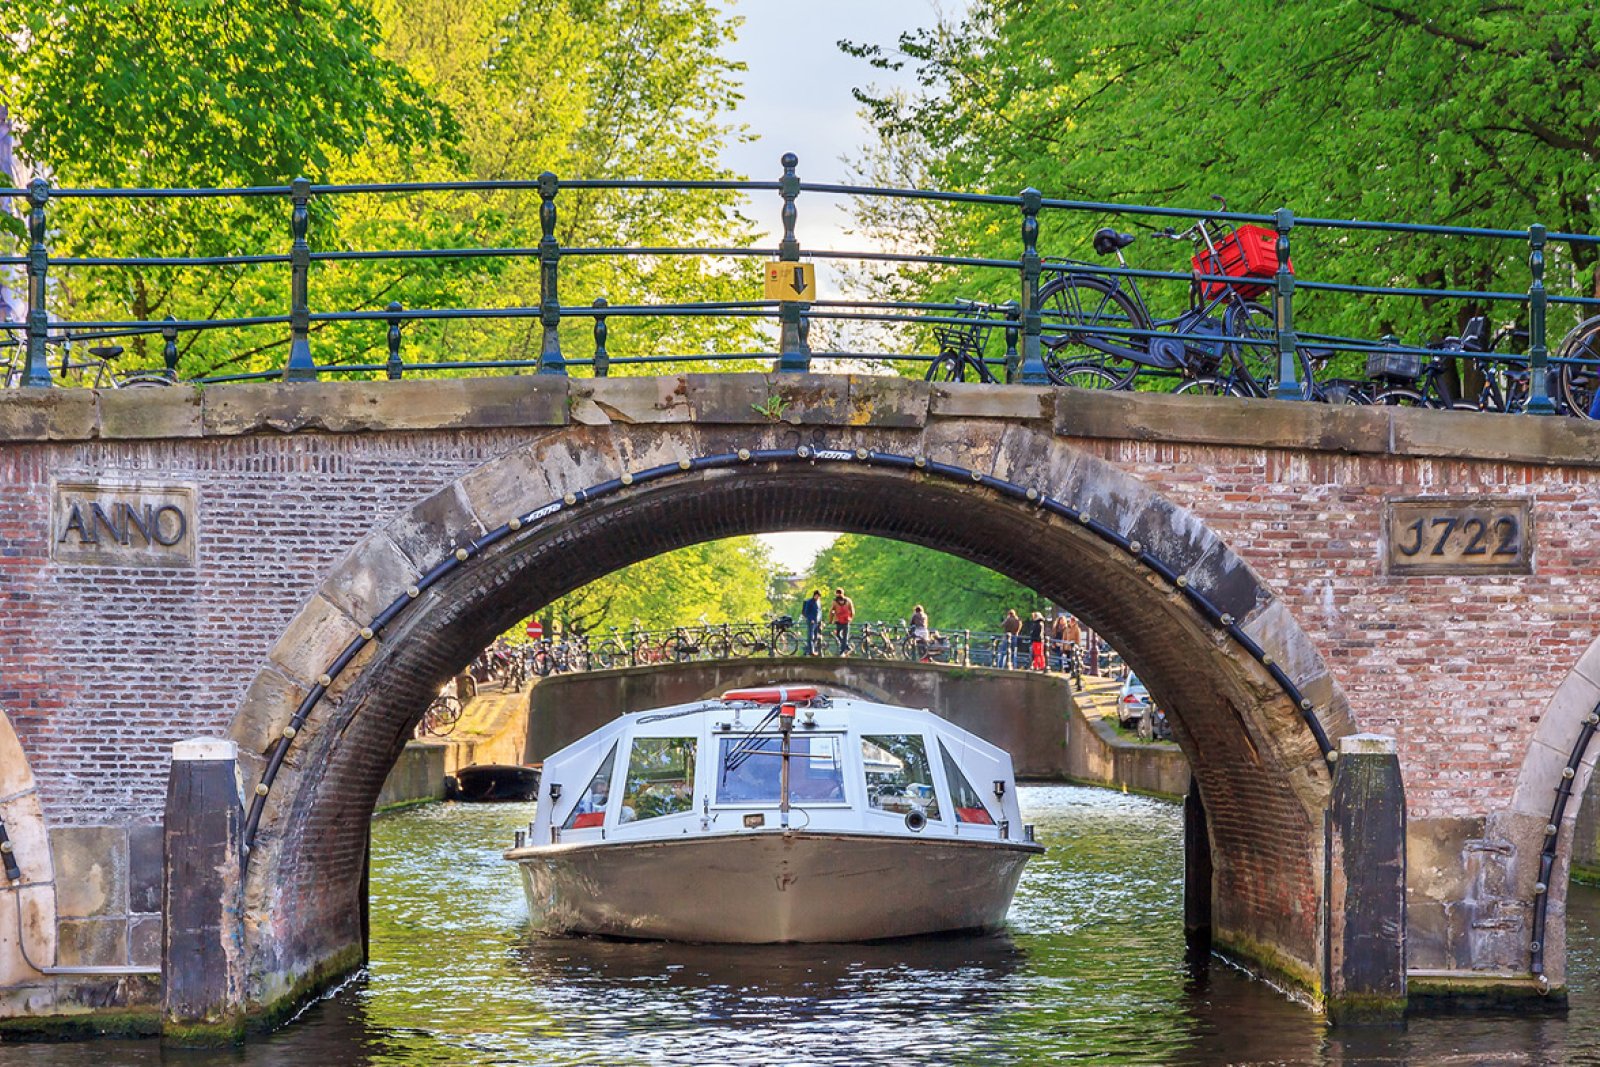 Canal cruise boat under an old arch bridge